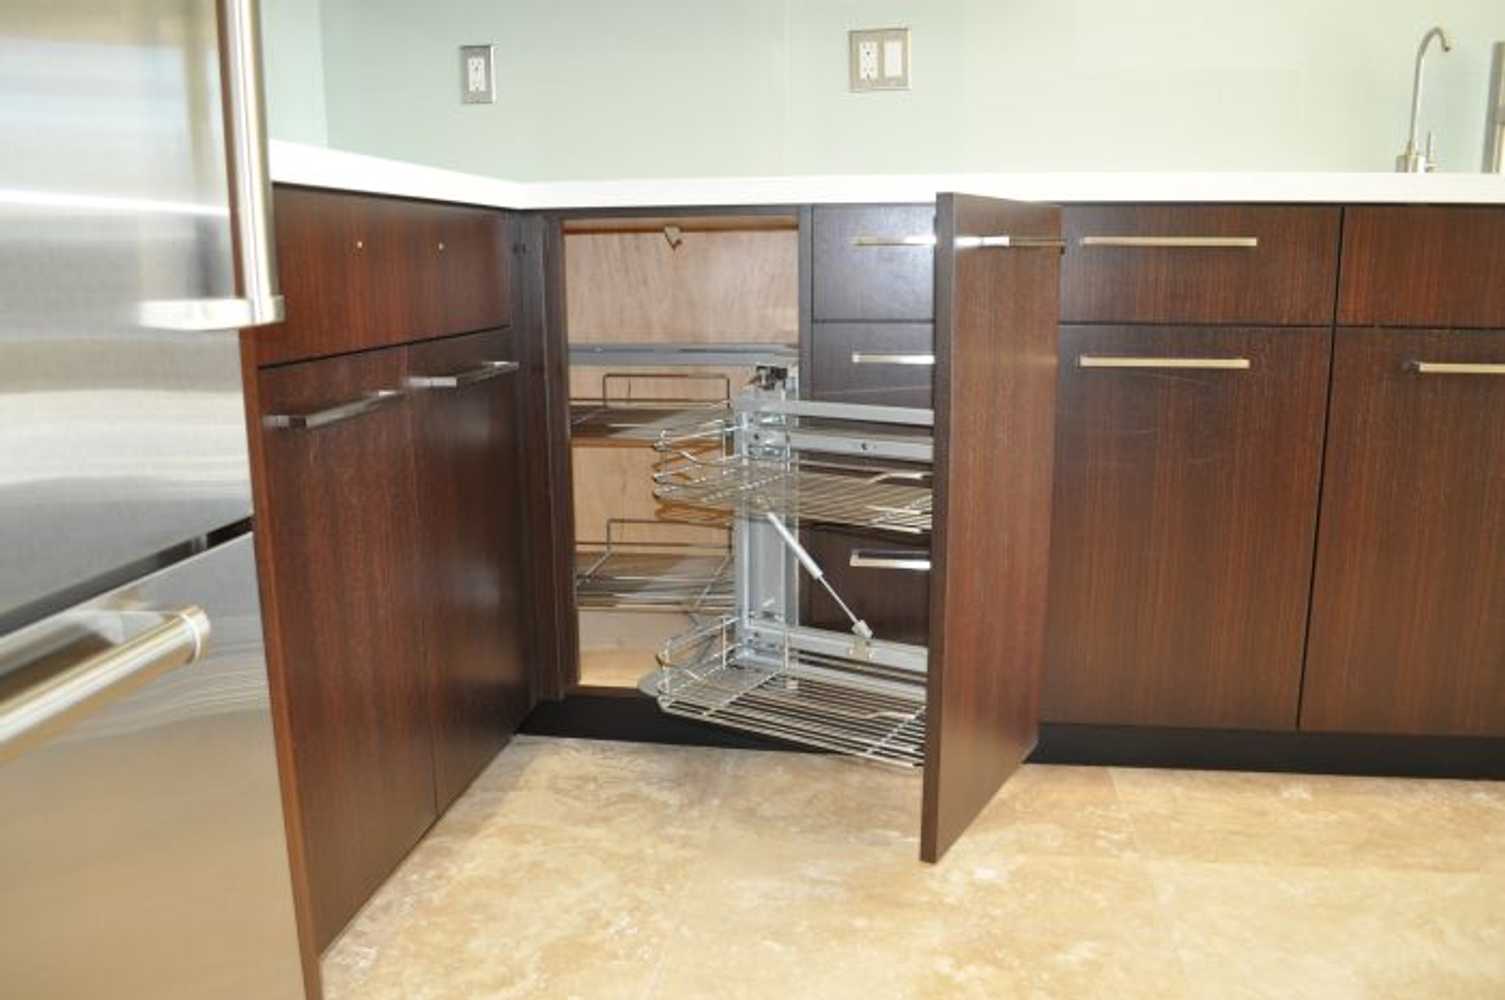 Kitchen Remodeling in Los Angeles